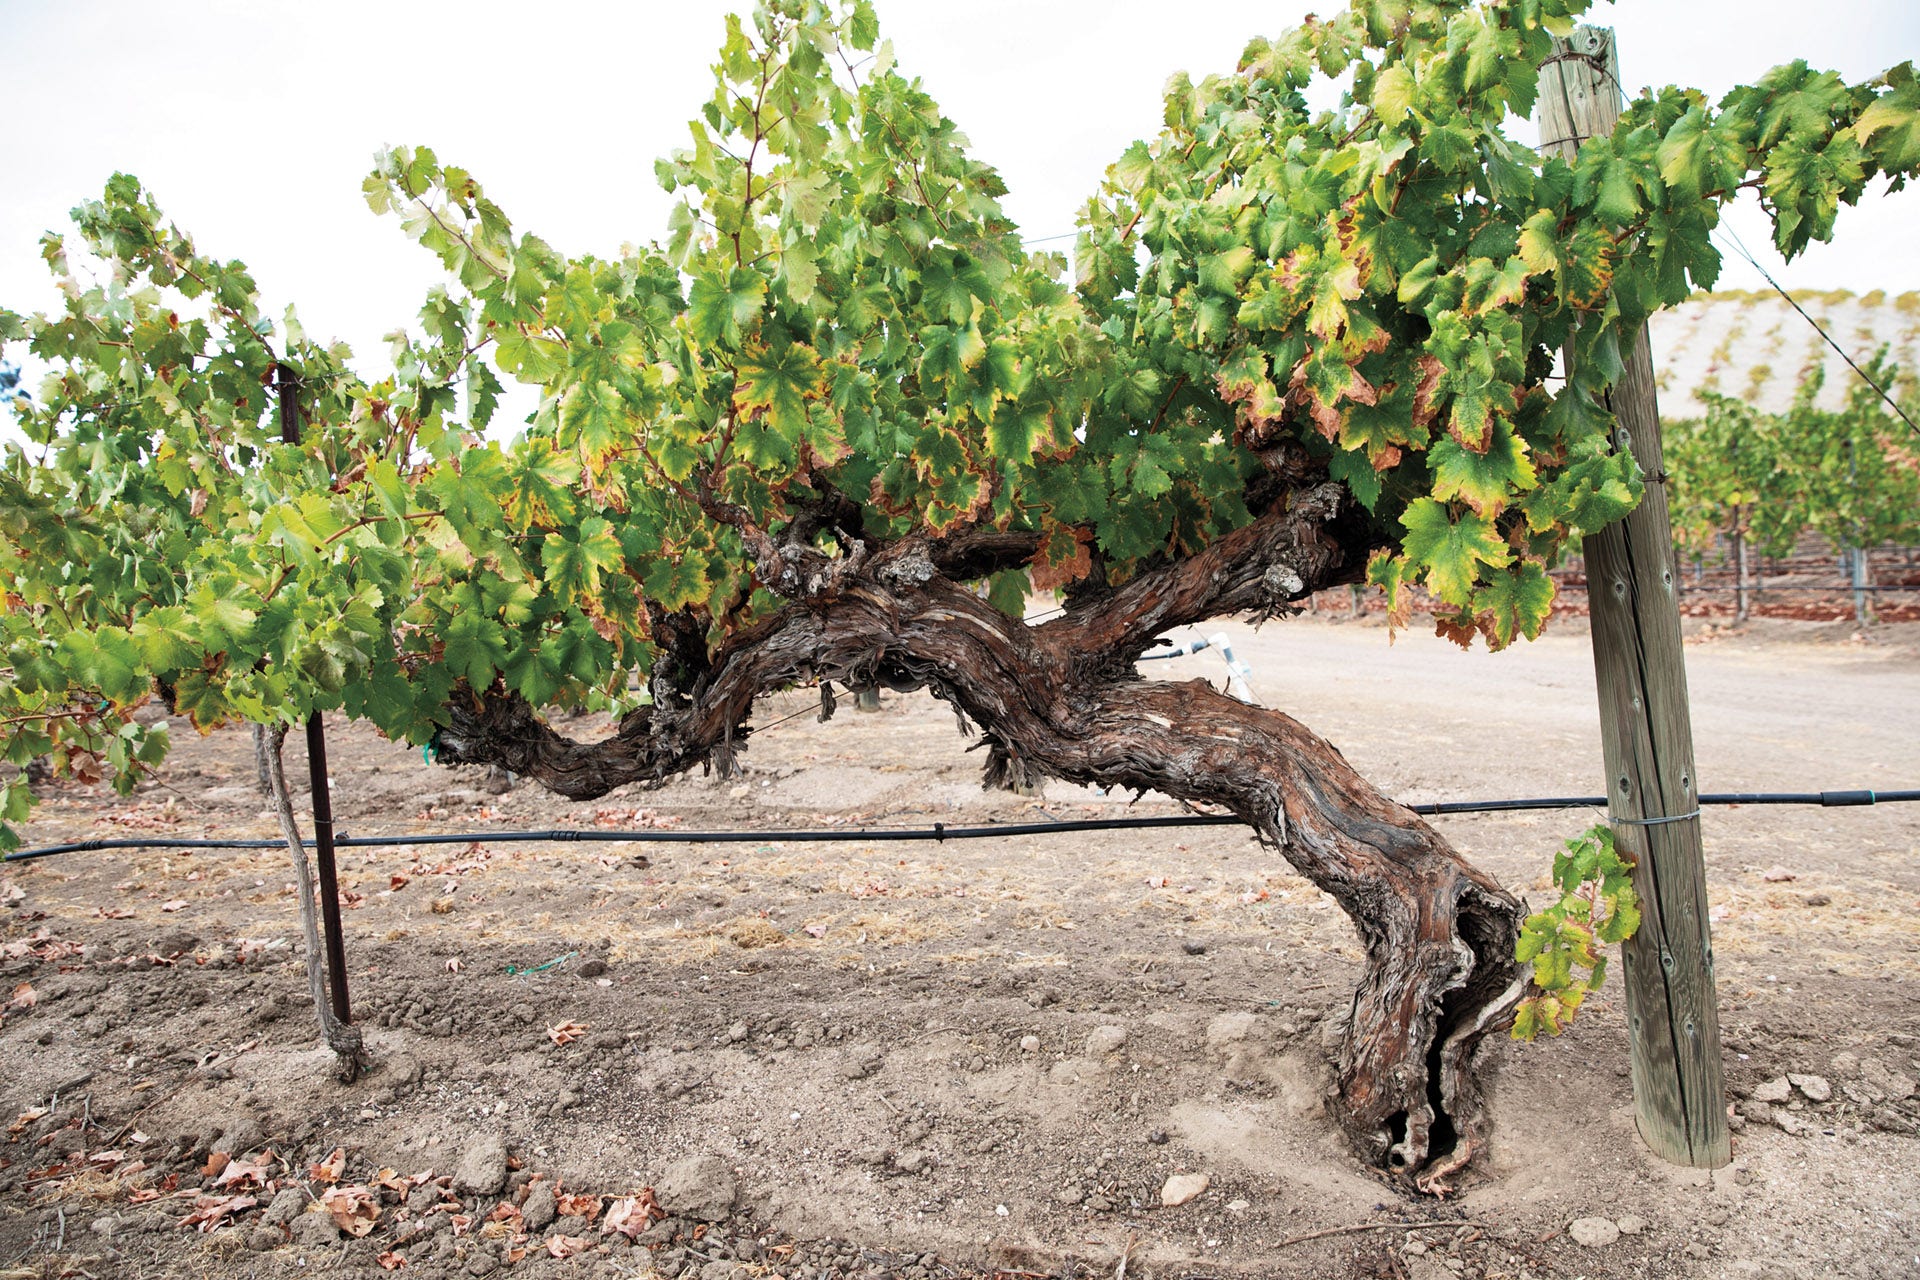 Six Producers Bringing out the Best in California Zinfandel